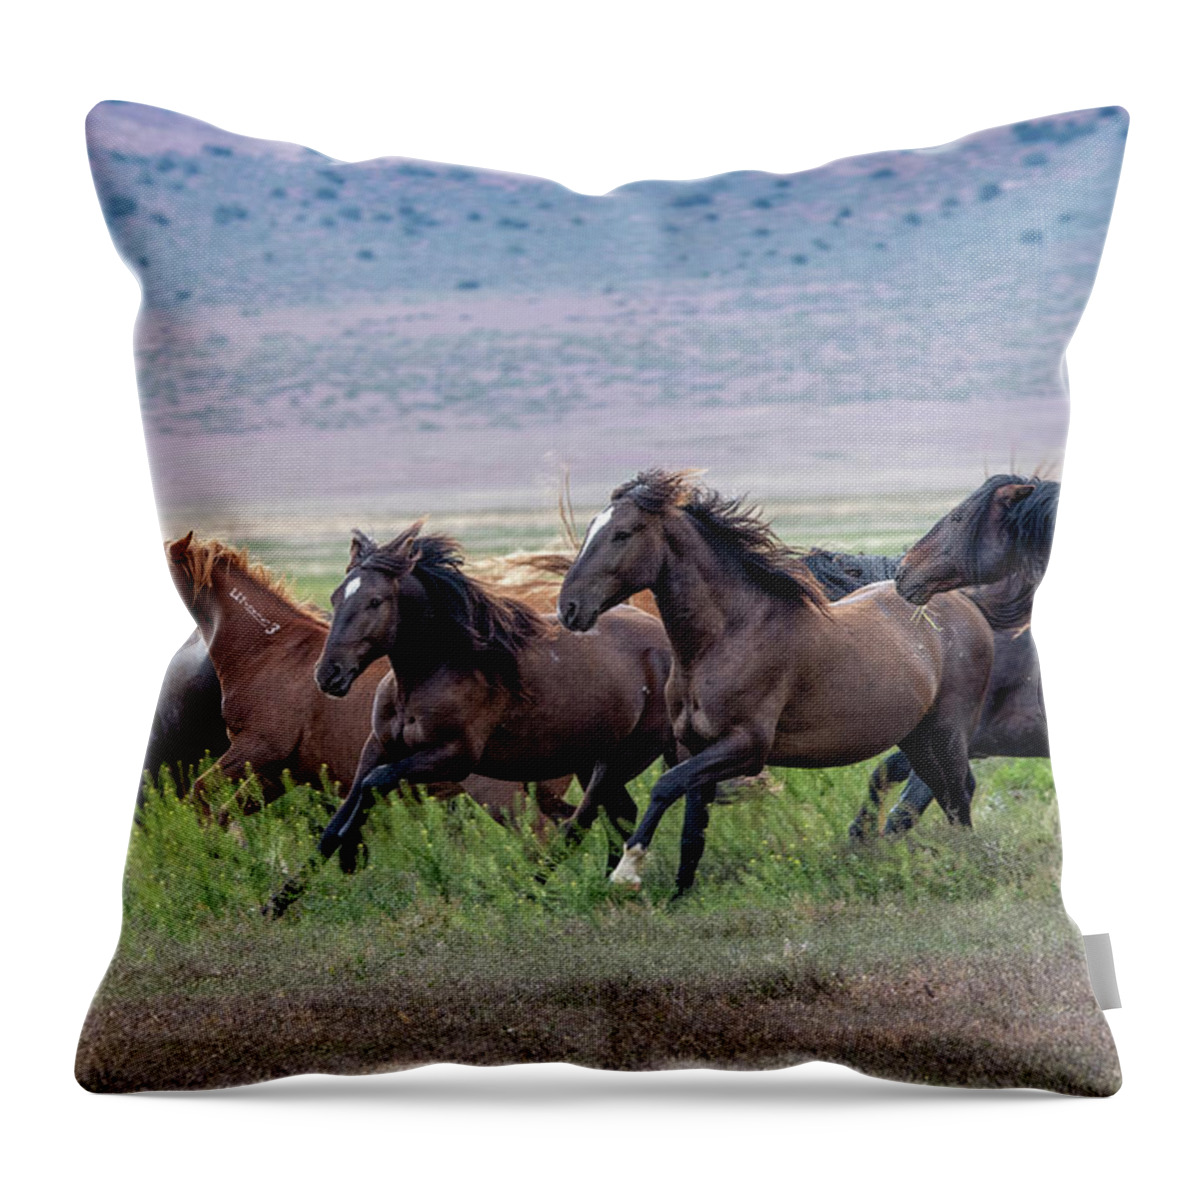 Horse Throw Pillow featuring the photograph Utah's Wild Horses by Jeanette Mahoney